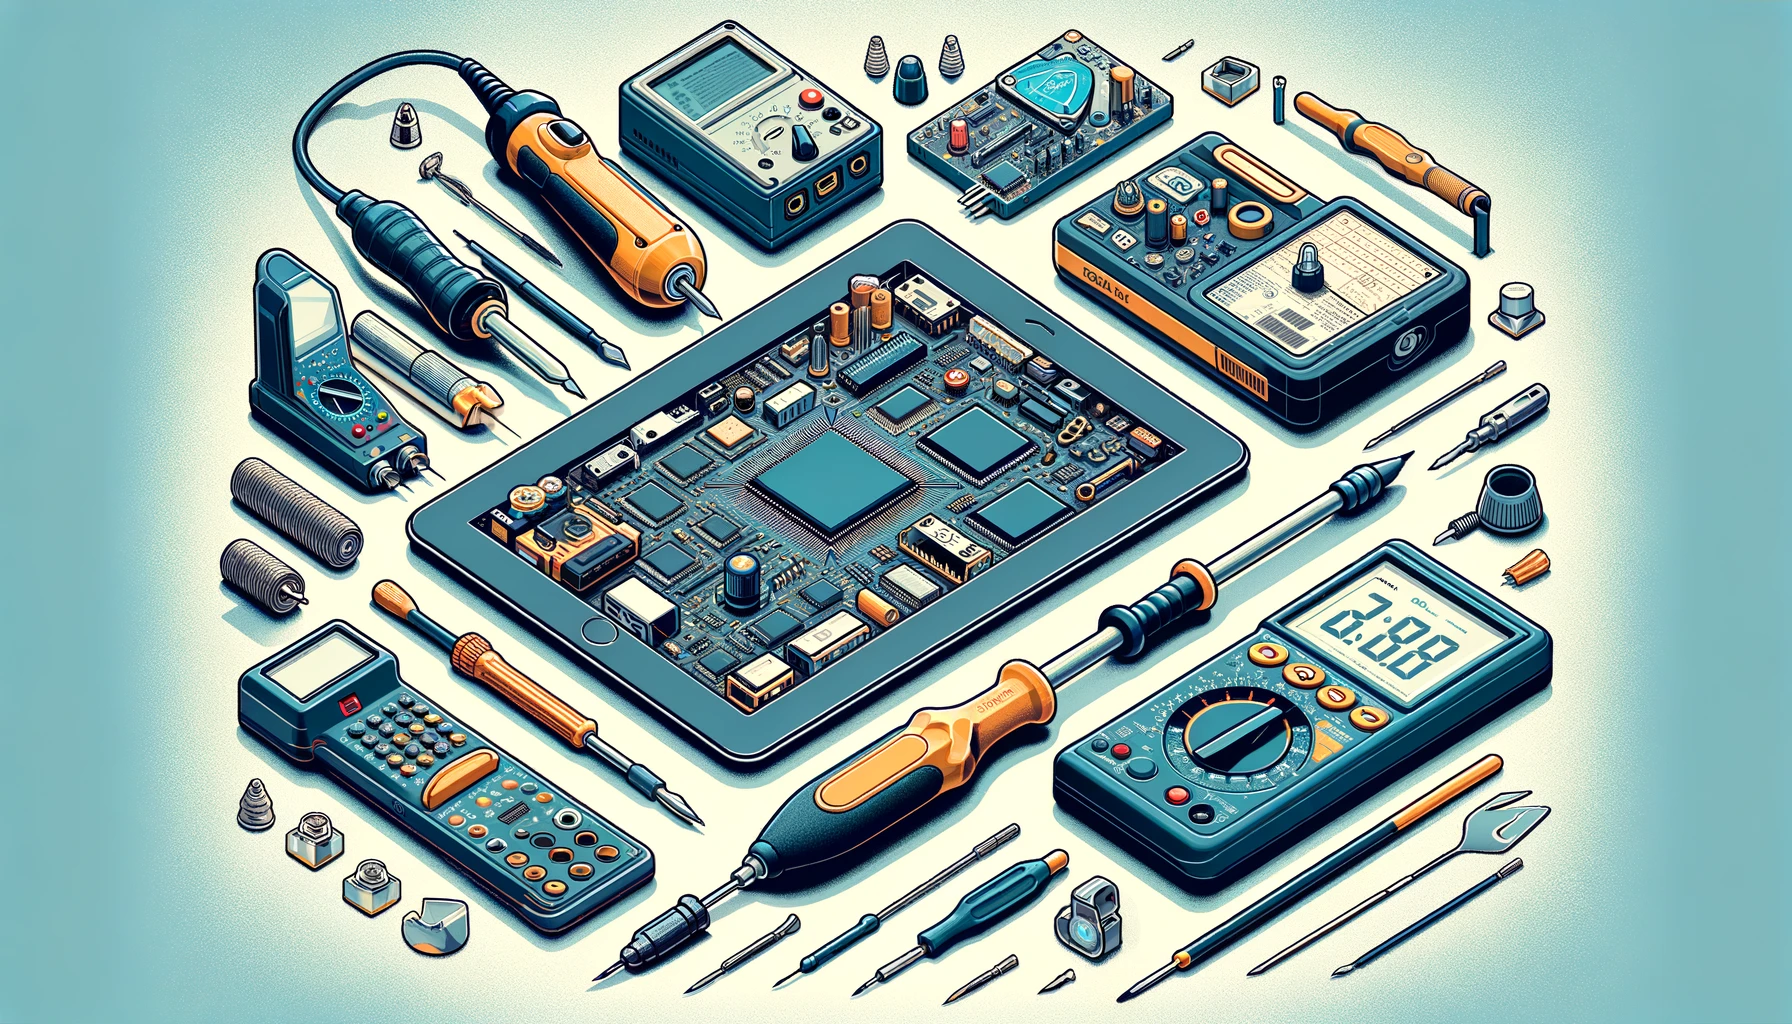 DIY LCD Screen Repair Tools: A visual guide showcasing essential tools for LCD repair, such as a soldering iron, multimeter, screwdrivers, and replacement parts.